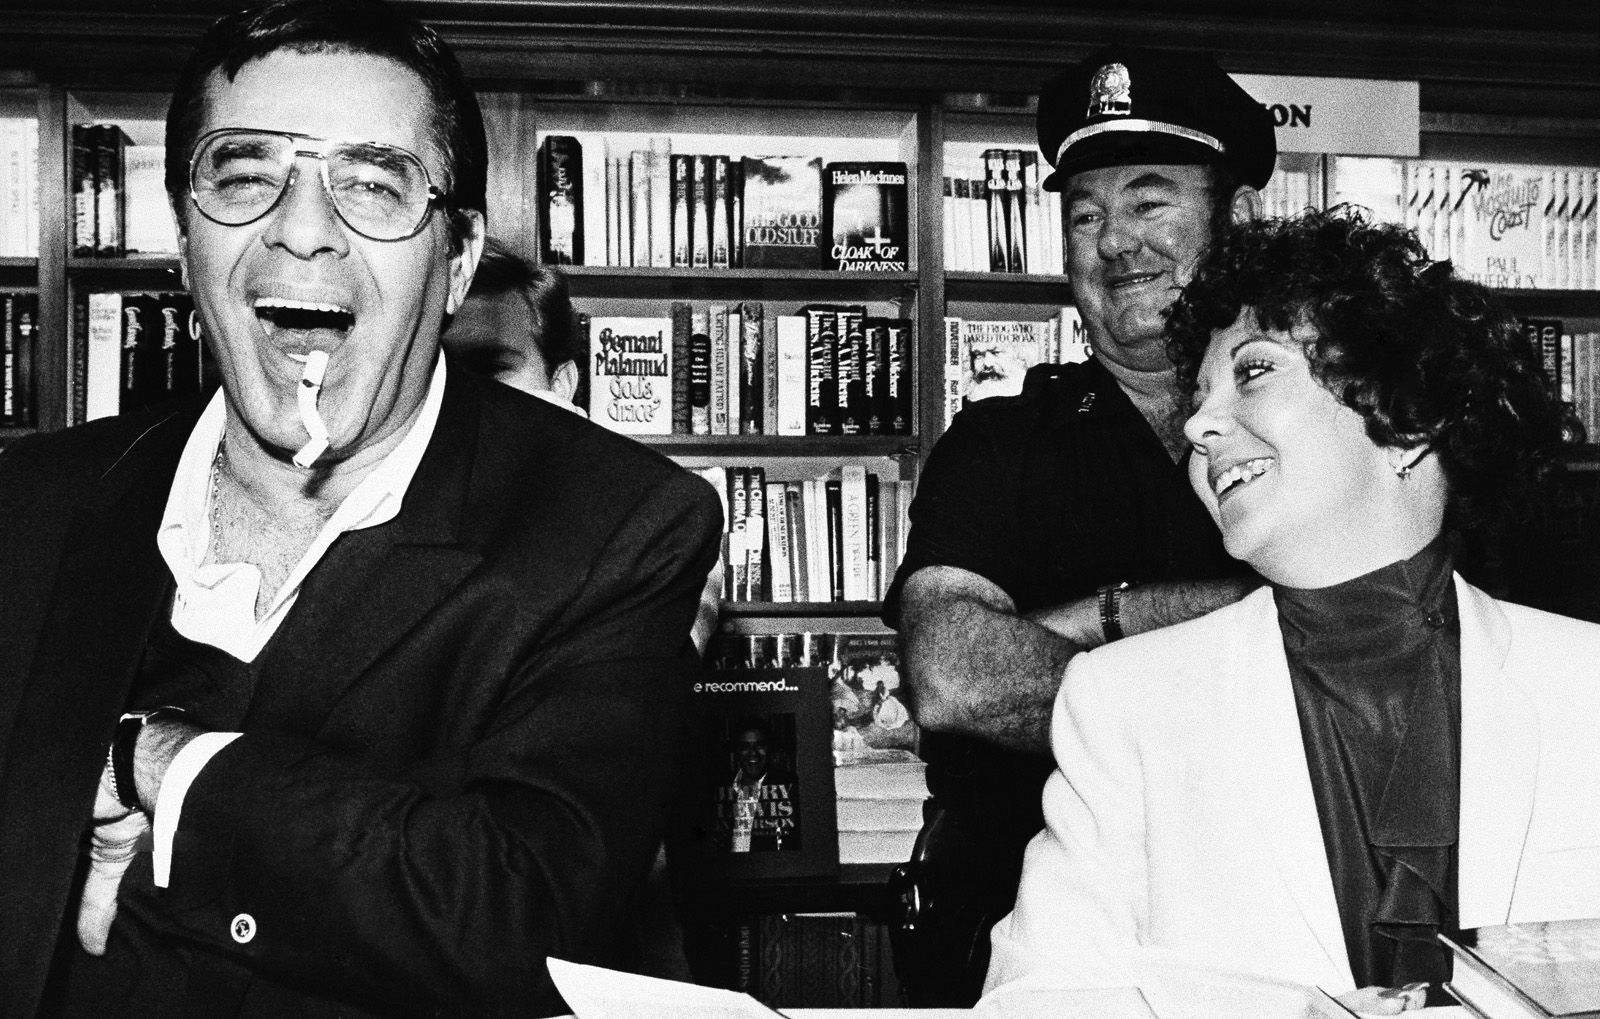 Comedian Jerry Lewis, left, with his fianc?e Sandee Pitnick, clowns around Saturday during an autograph session on Saturday, Oct. 10, 1982 at a Cambridge, Mass., bookstore where he was promotong his new book, "Jerry Lewis in Person."   (AP Photo/Keith Jacobson)